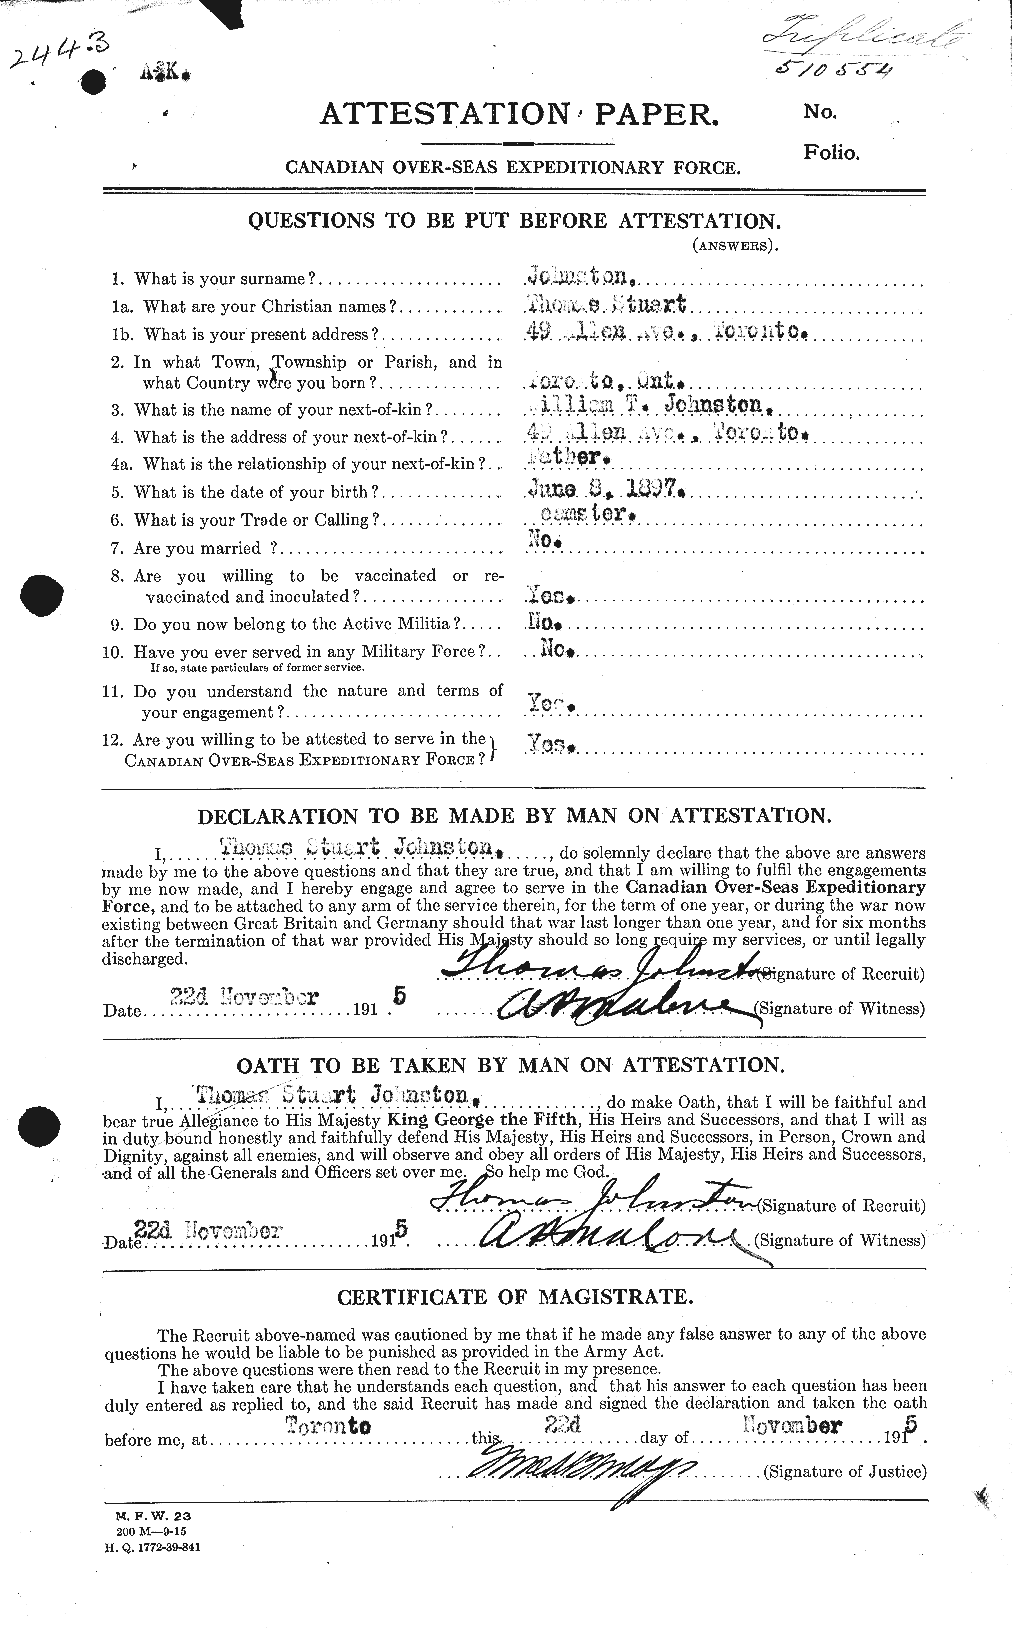 Personnel Records of the First World War - CEF 427176a